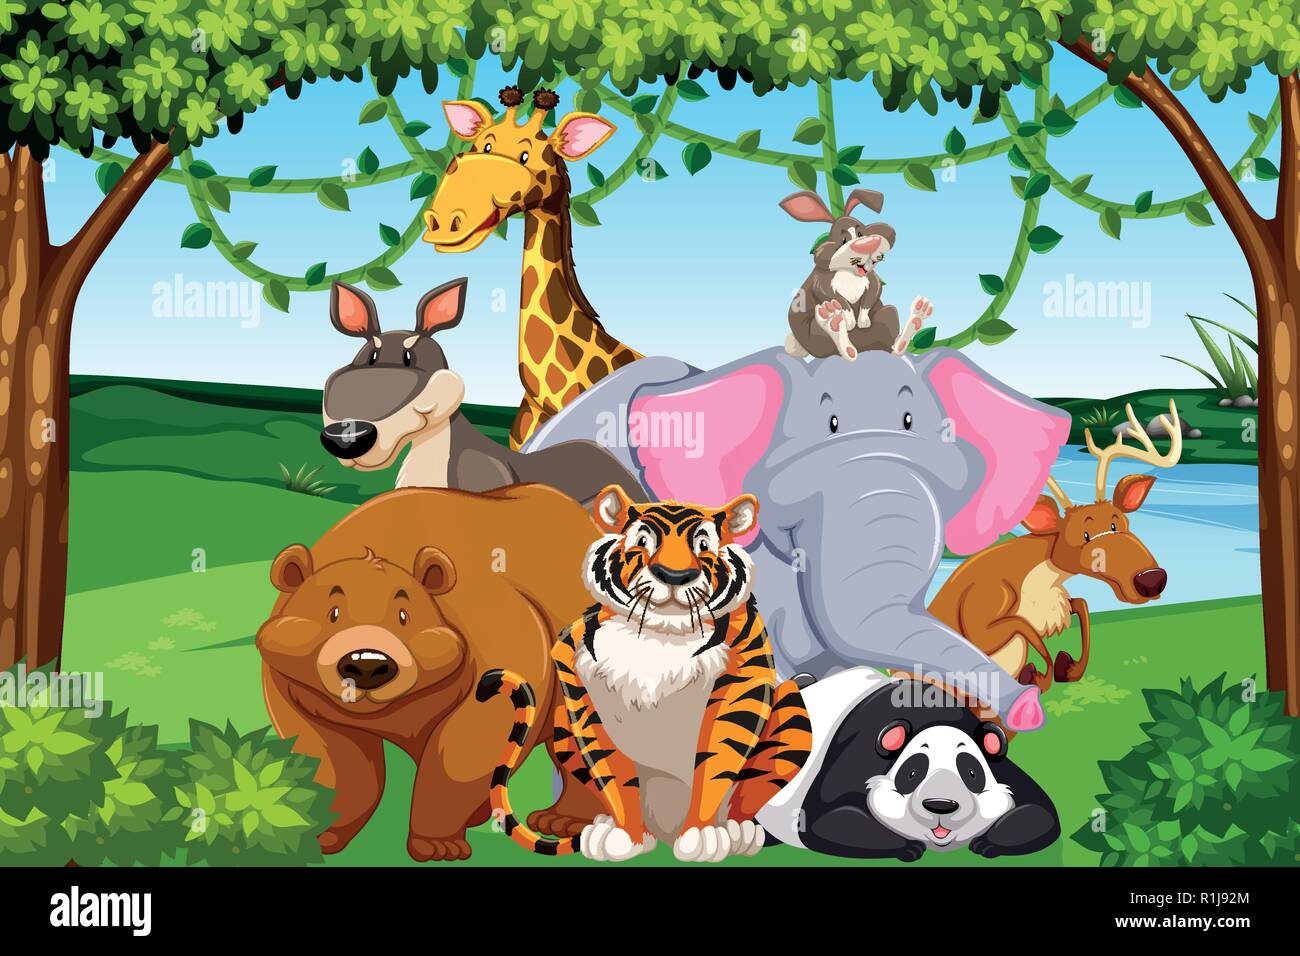 Wild animals in the forest illustration Stock Vector